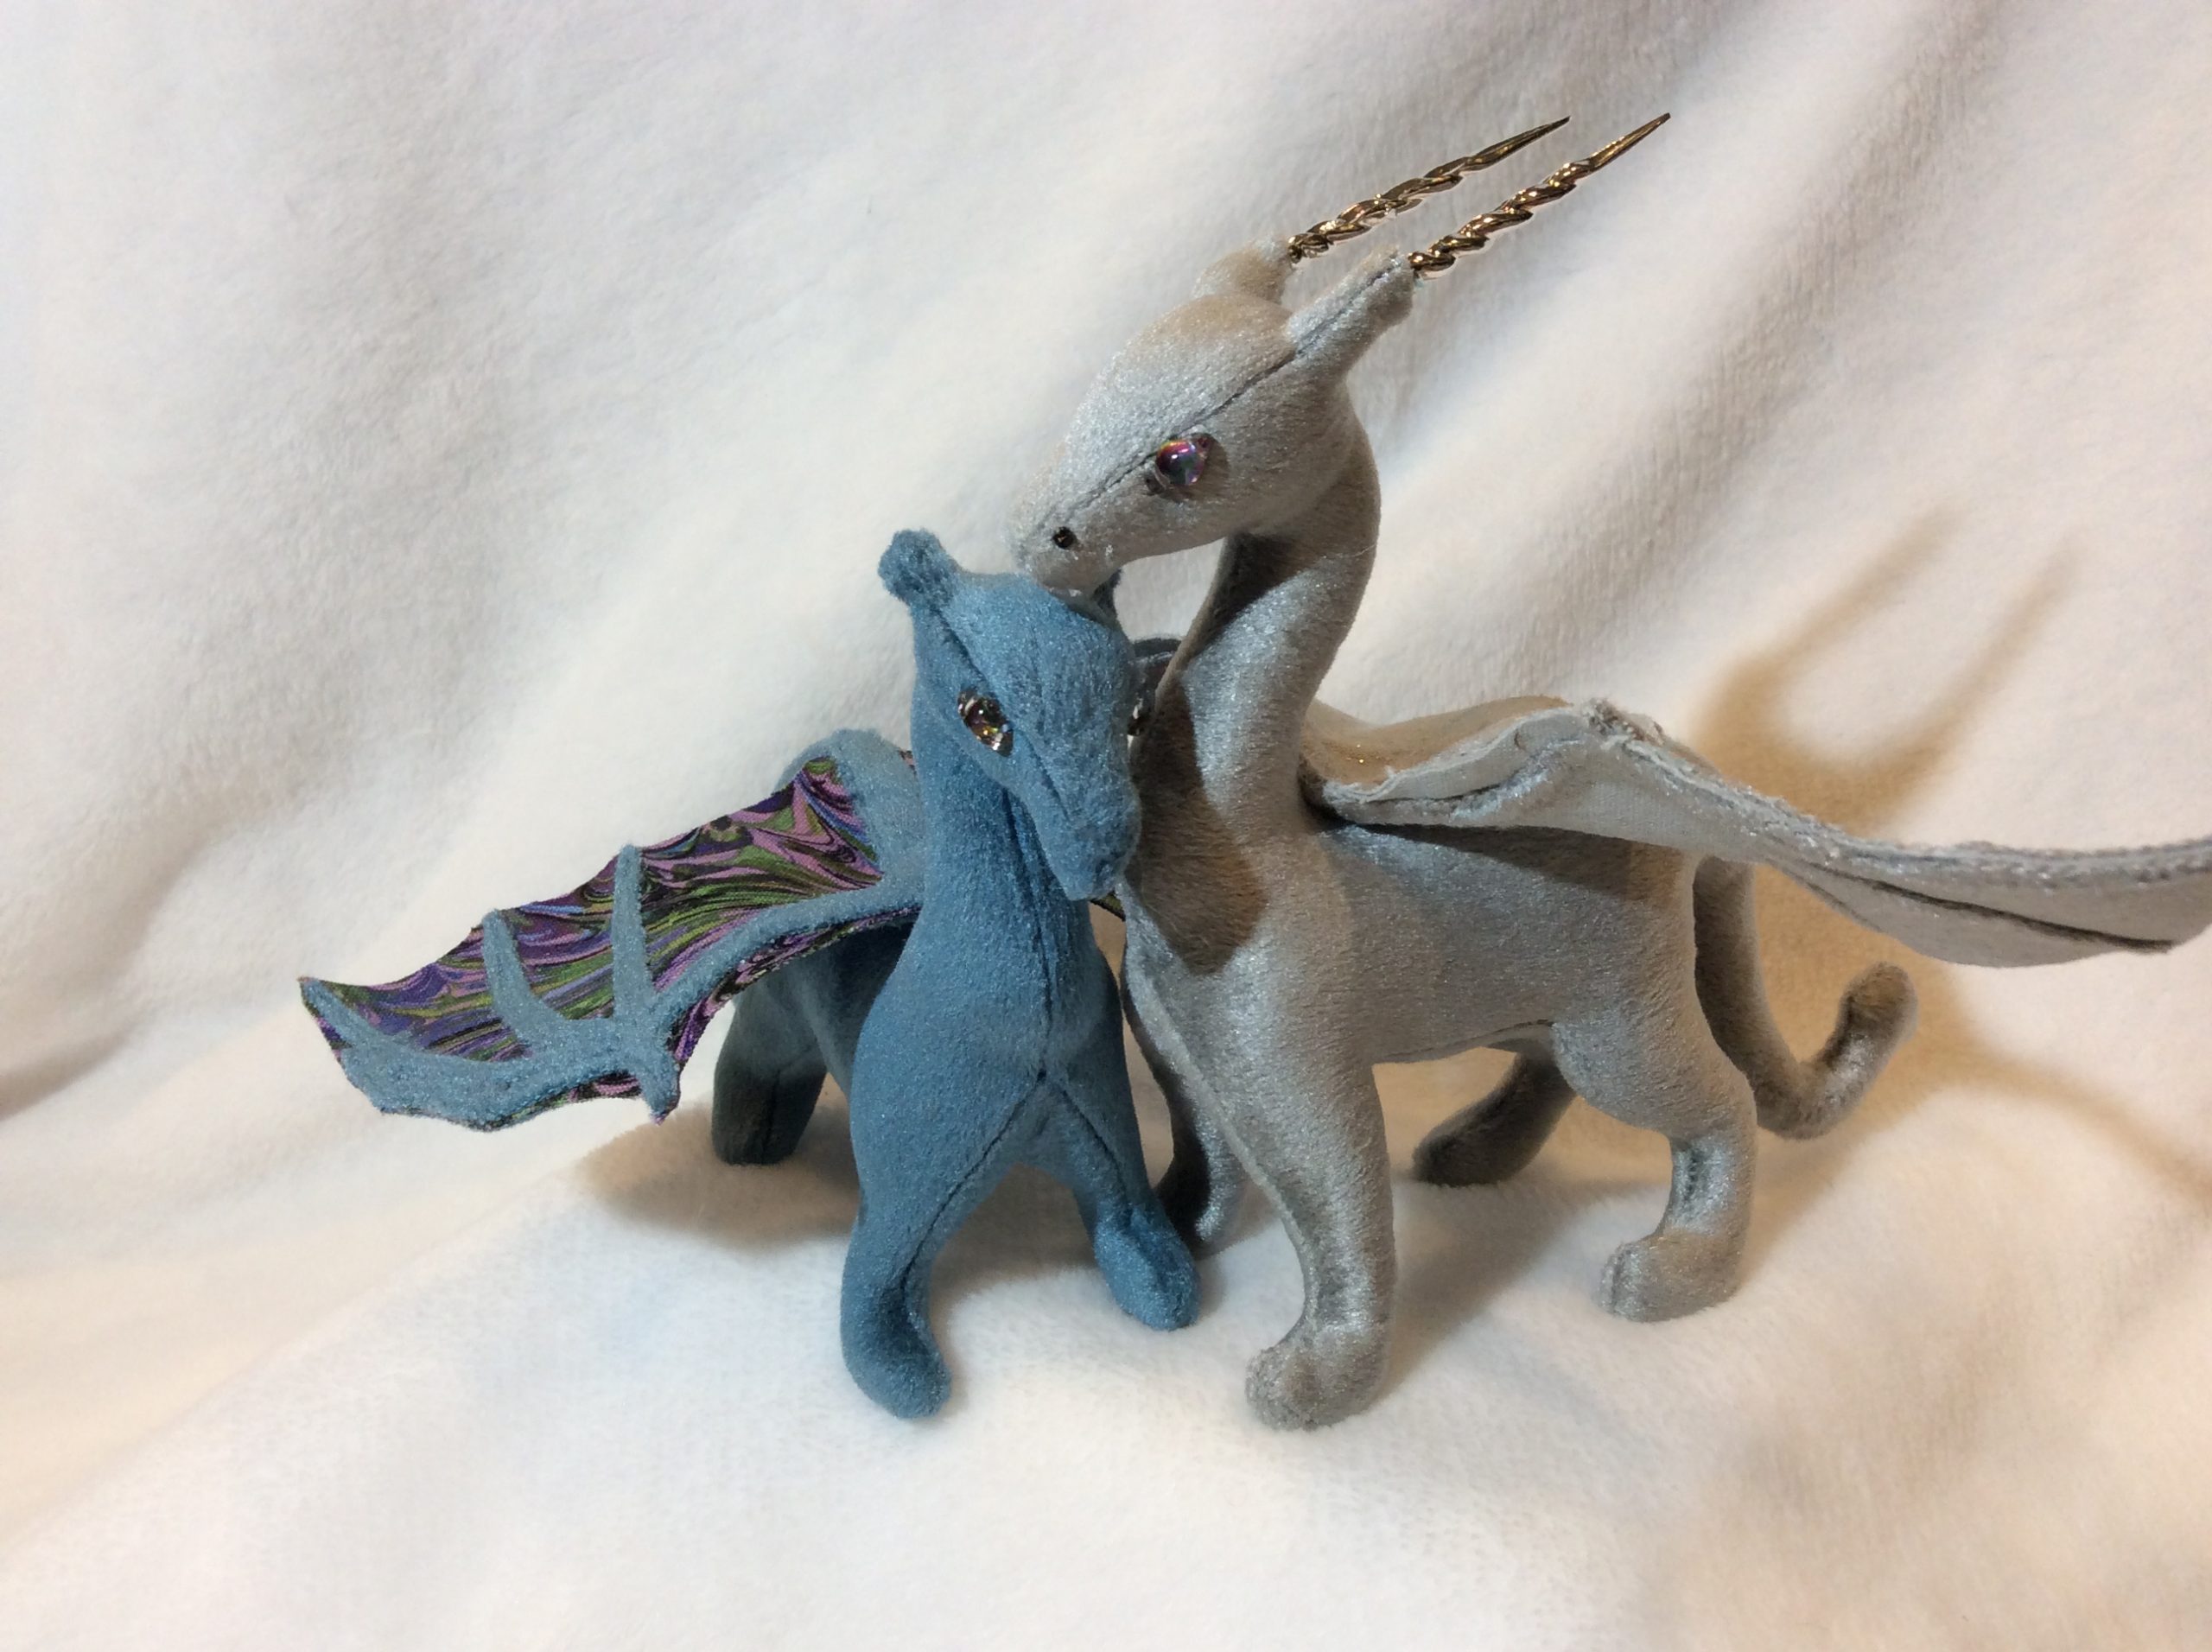 Little Blue Marble and Silver Sparkle dragons coming soon